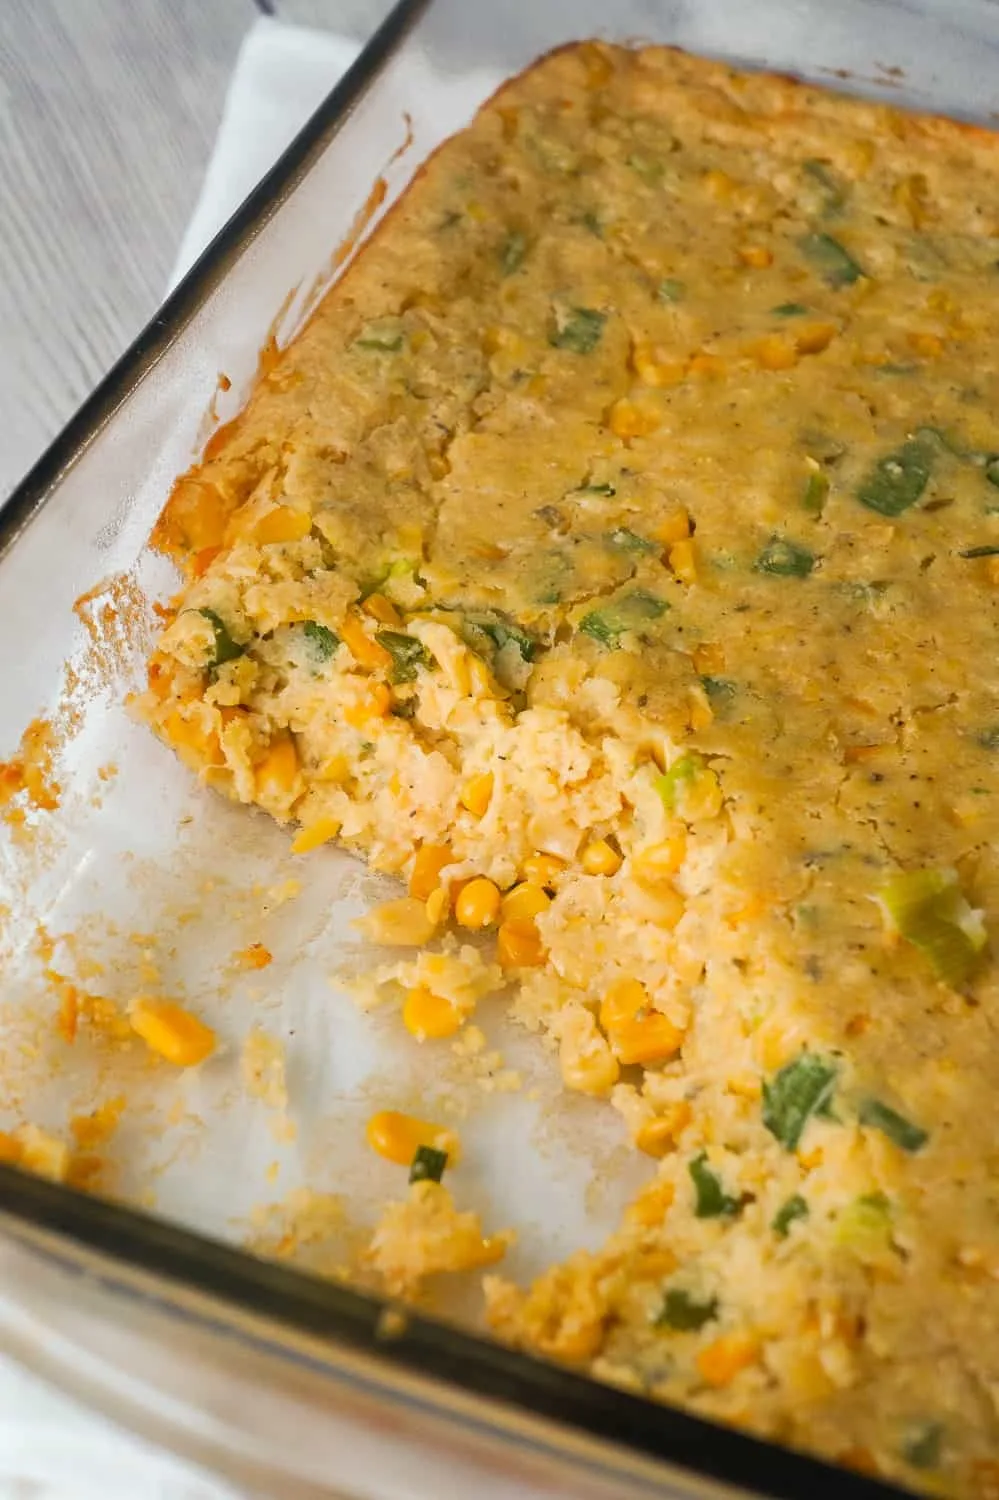 Corn Casserole with Cream Cheese is an easy side dish recipe perfect for holiday dinners and potlucks. This cheesy corn casserole made with cornbread mix is loaded with green onions and Havarti cheese.